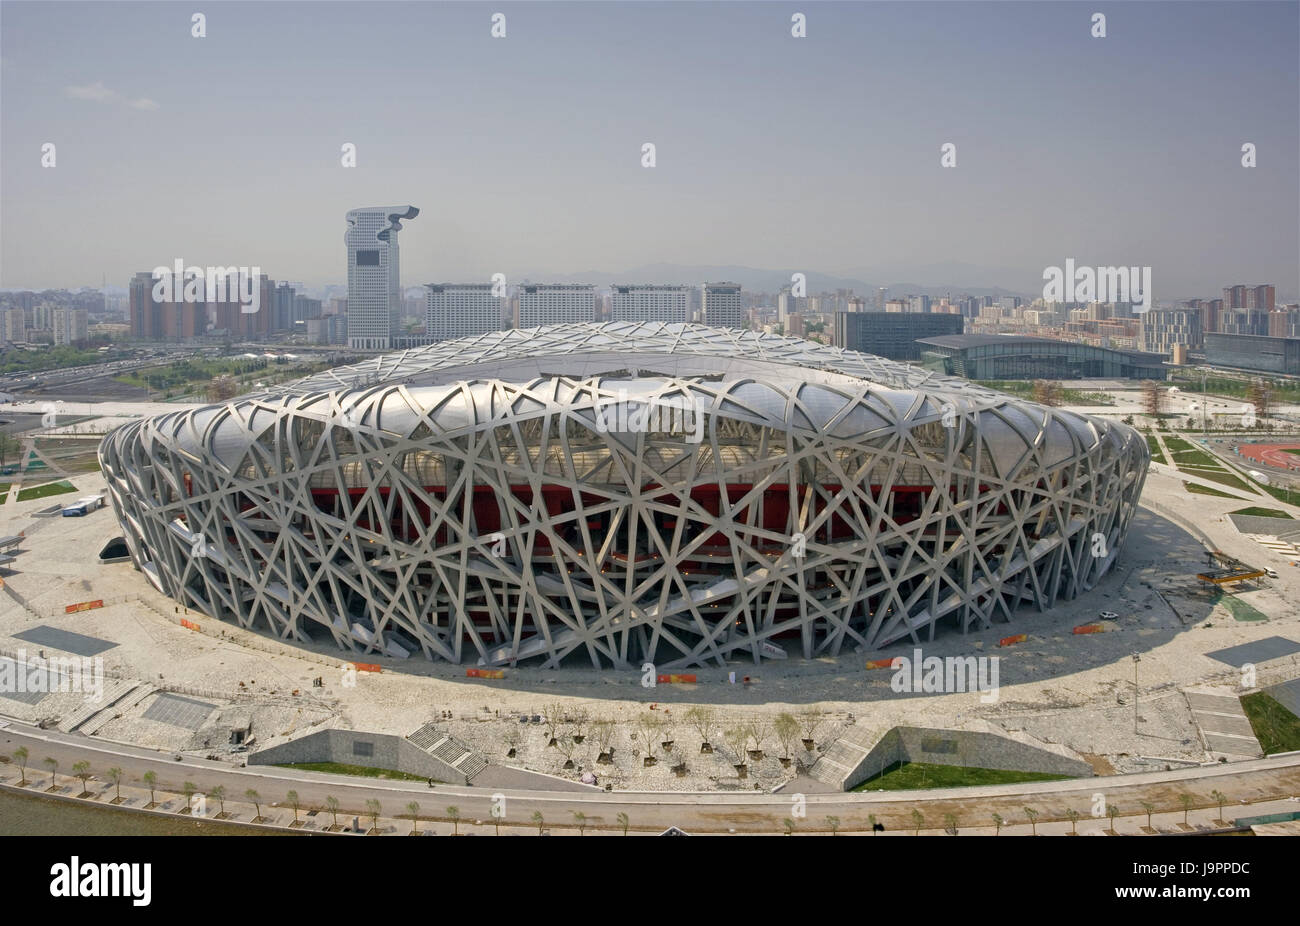 China,Peking,Olympic stadium,Asia,Eastern Asia,town,capital,building,architecture,stadium,national stadium,venue,Olympic Games,summer Games,outside,deserted, Stock Photo